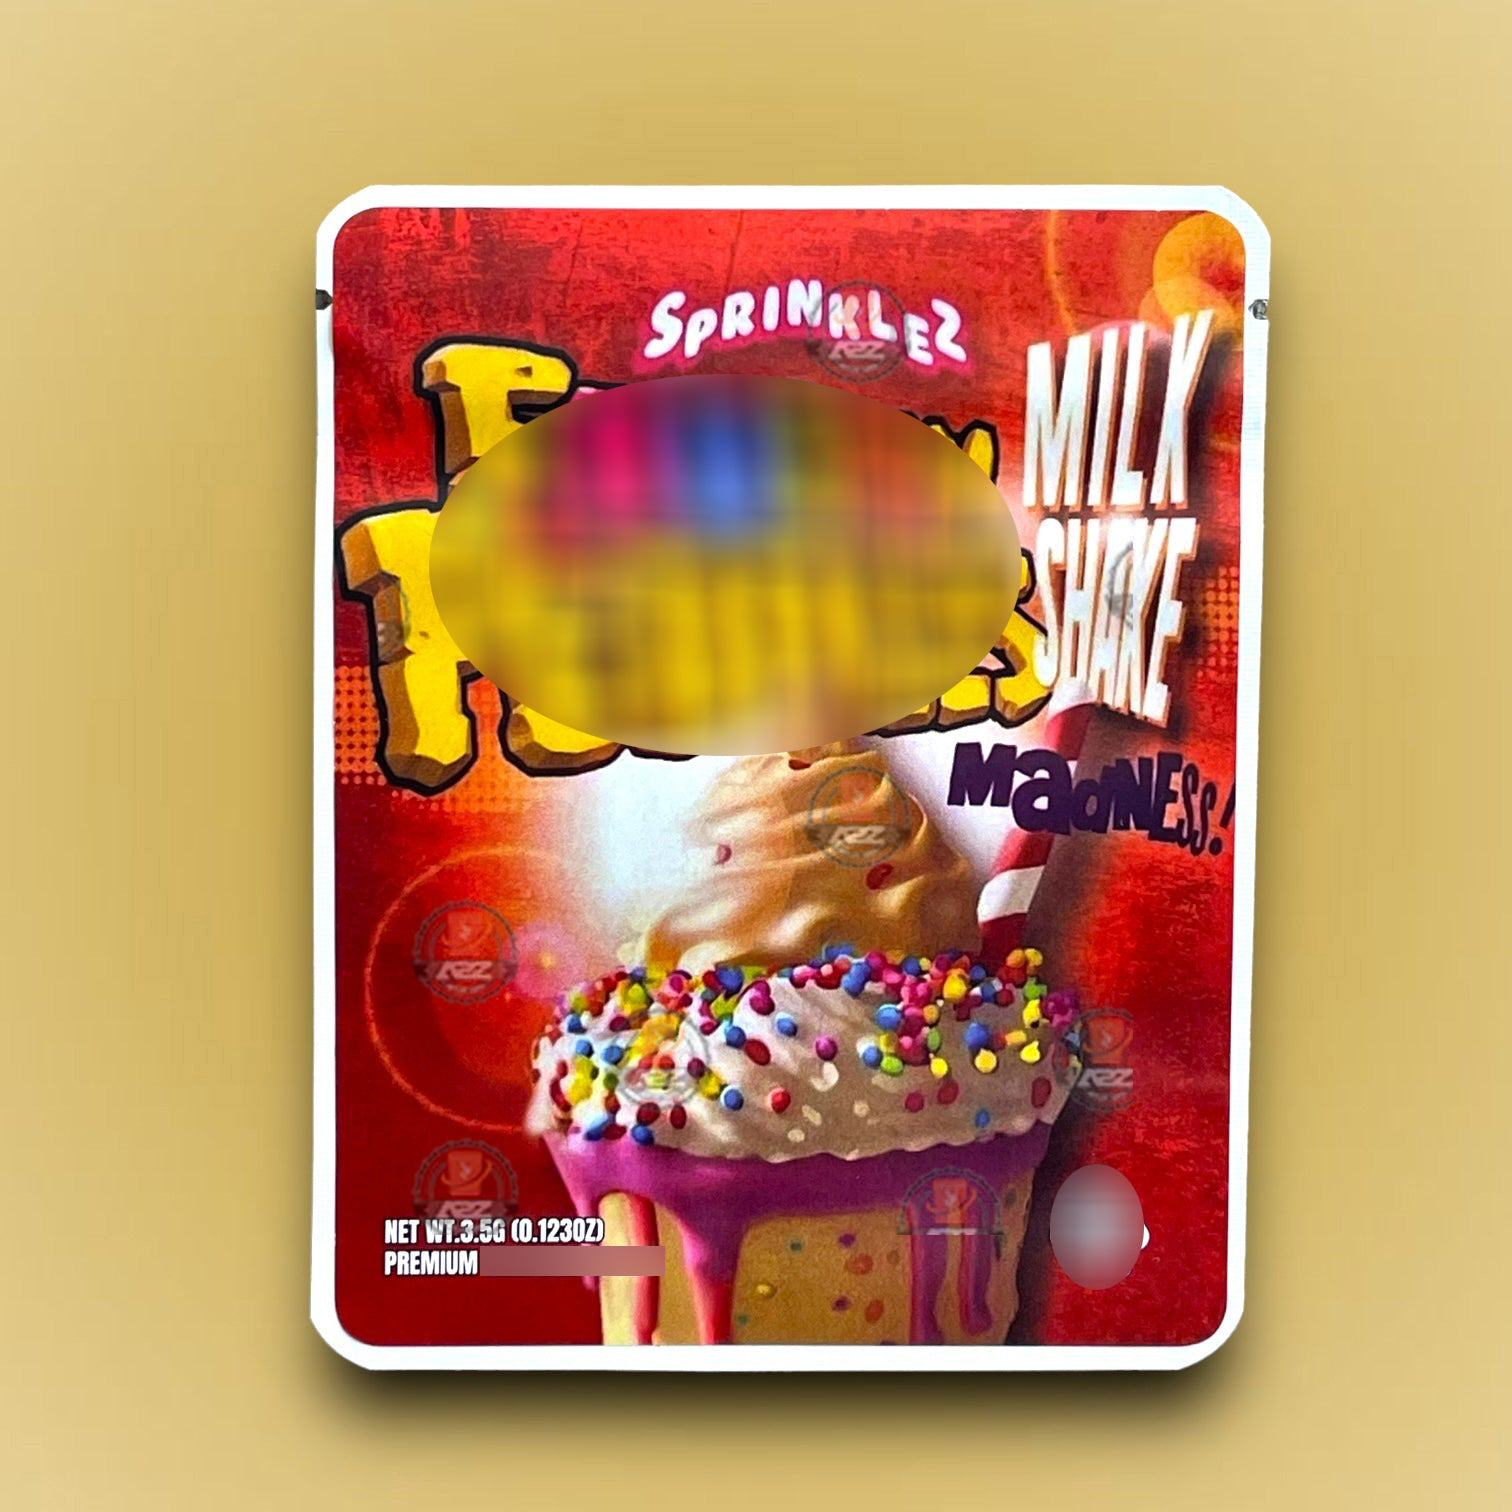 Sprinklez Milk Shake Madness 3.5g Mylar Bags -With stickers and labels